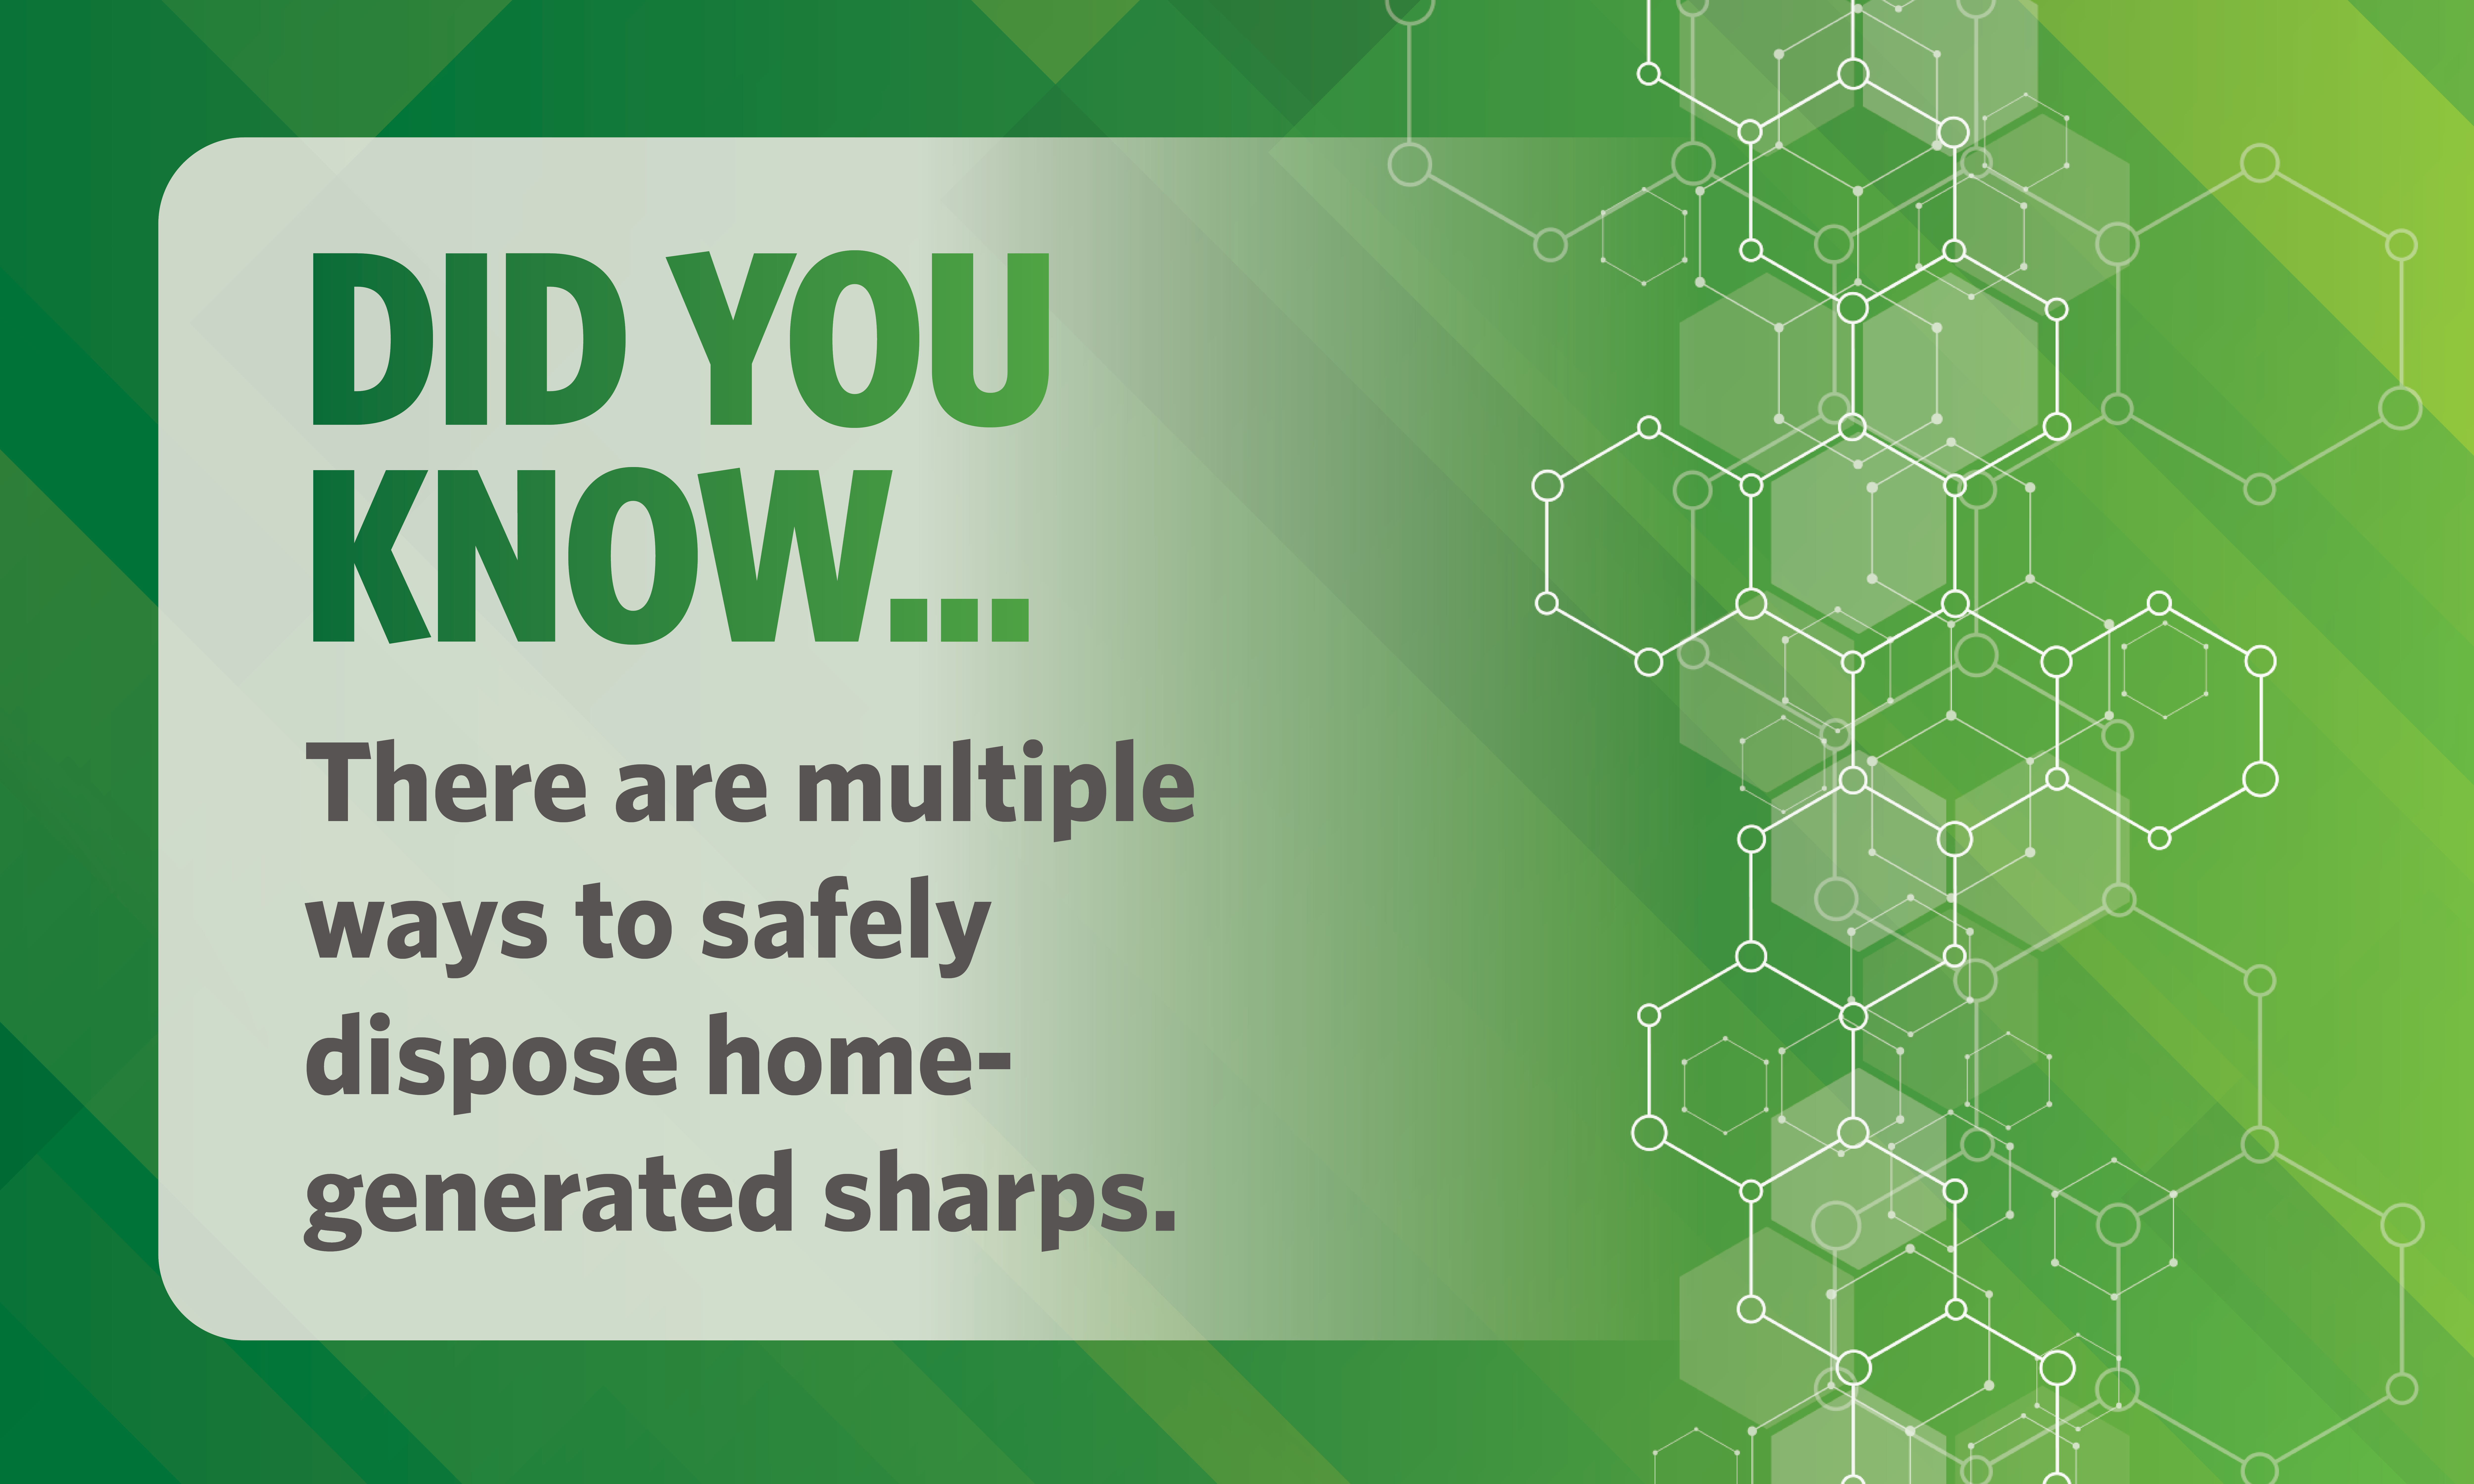 Discover How to Safely Dispose Home-Generated Sharps